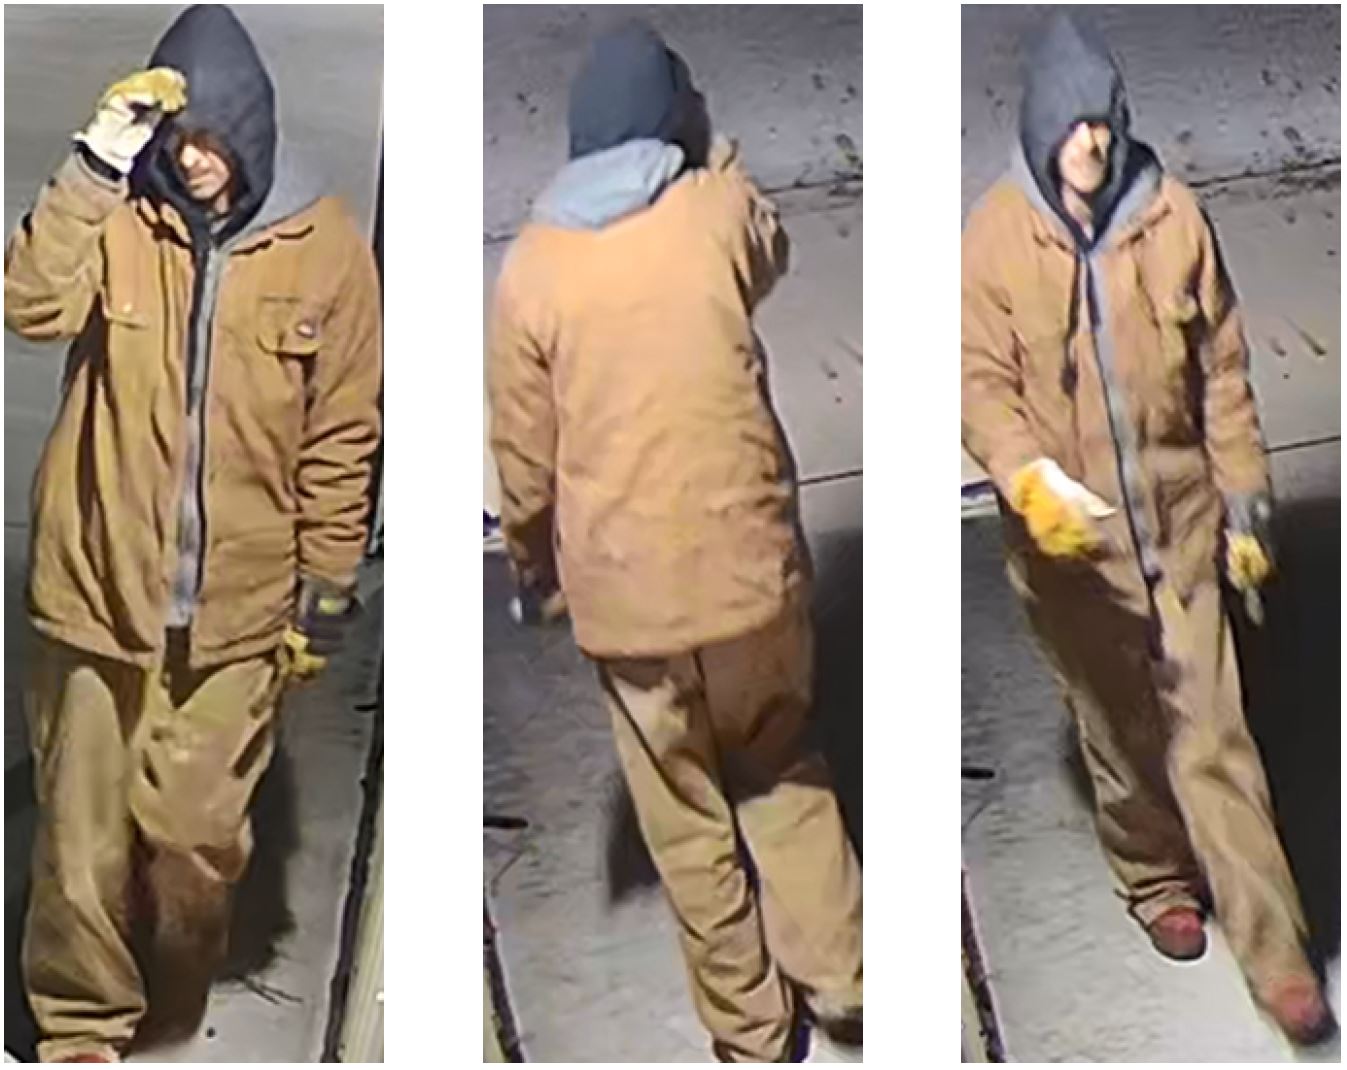 Collage of burglary suspect dressed in tan jacket, gray hoodie and tan pants. Suspect is also wearing yellow gloves. 